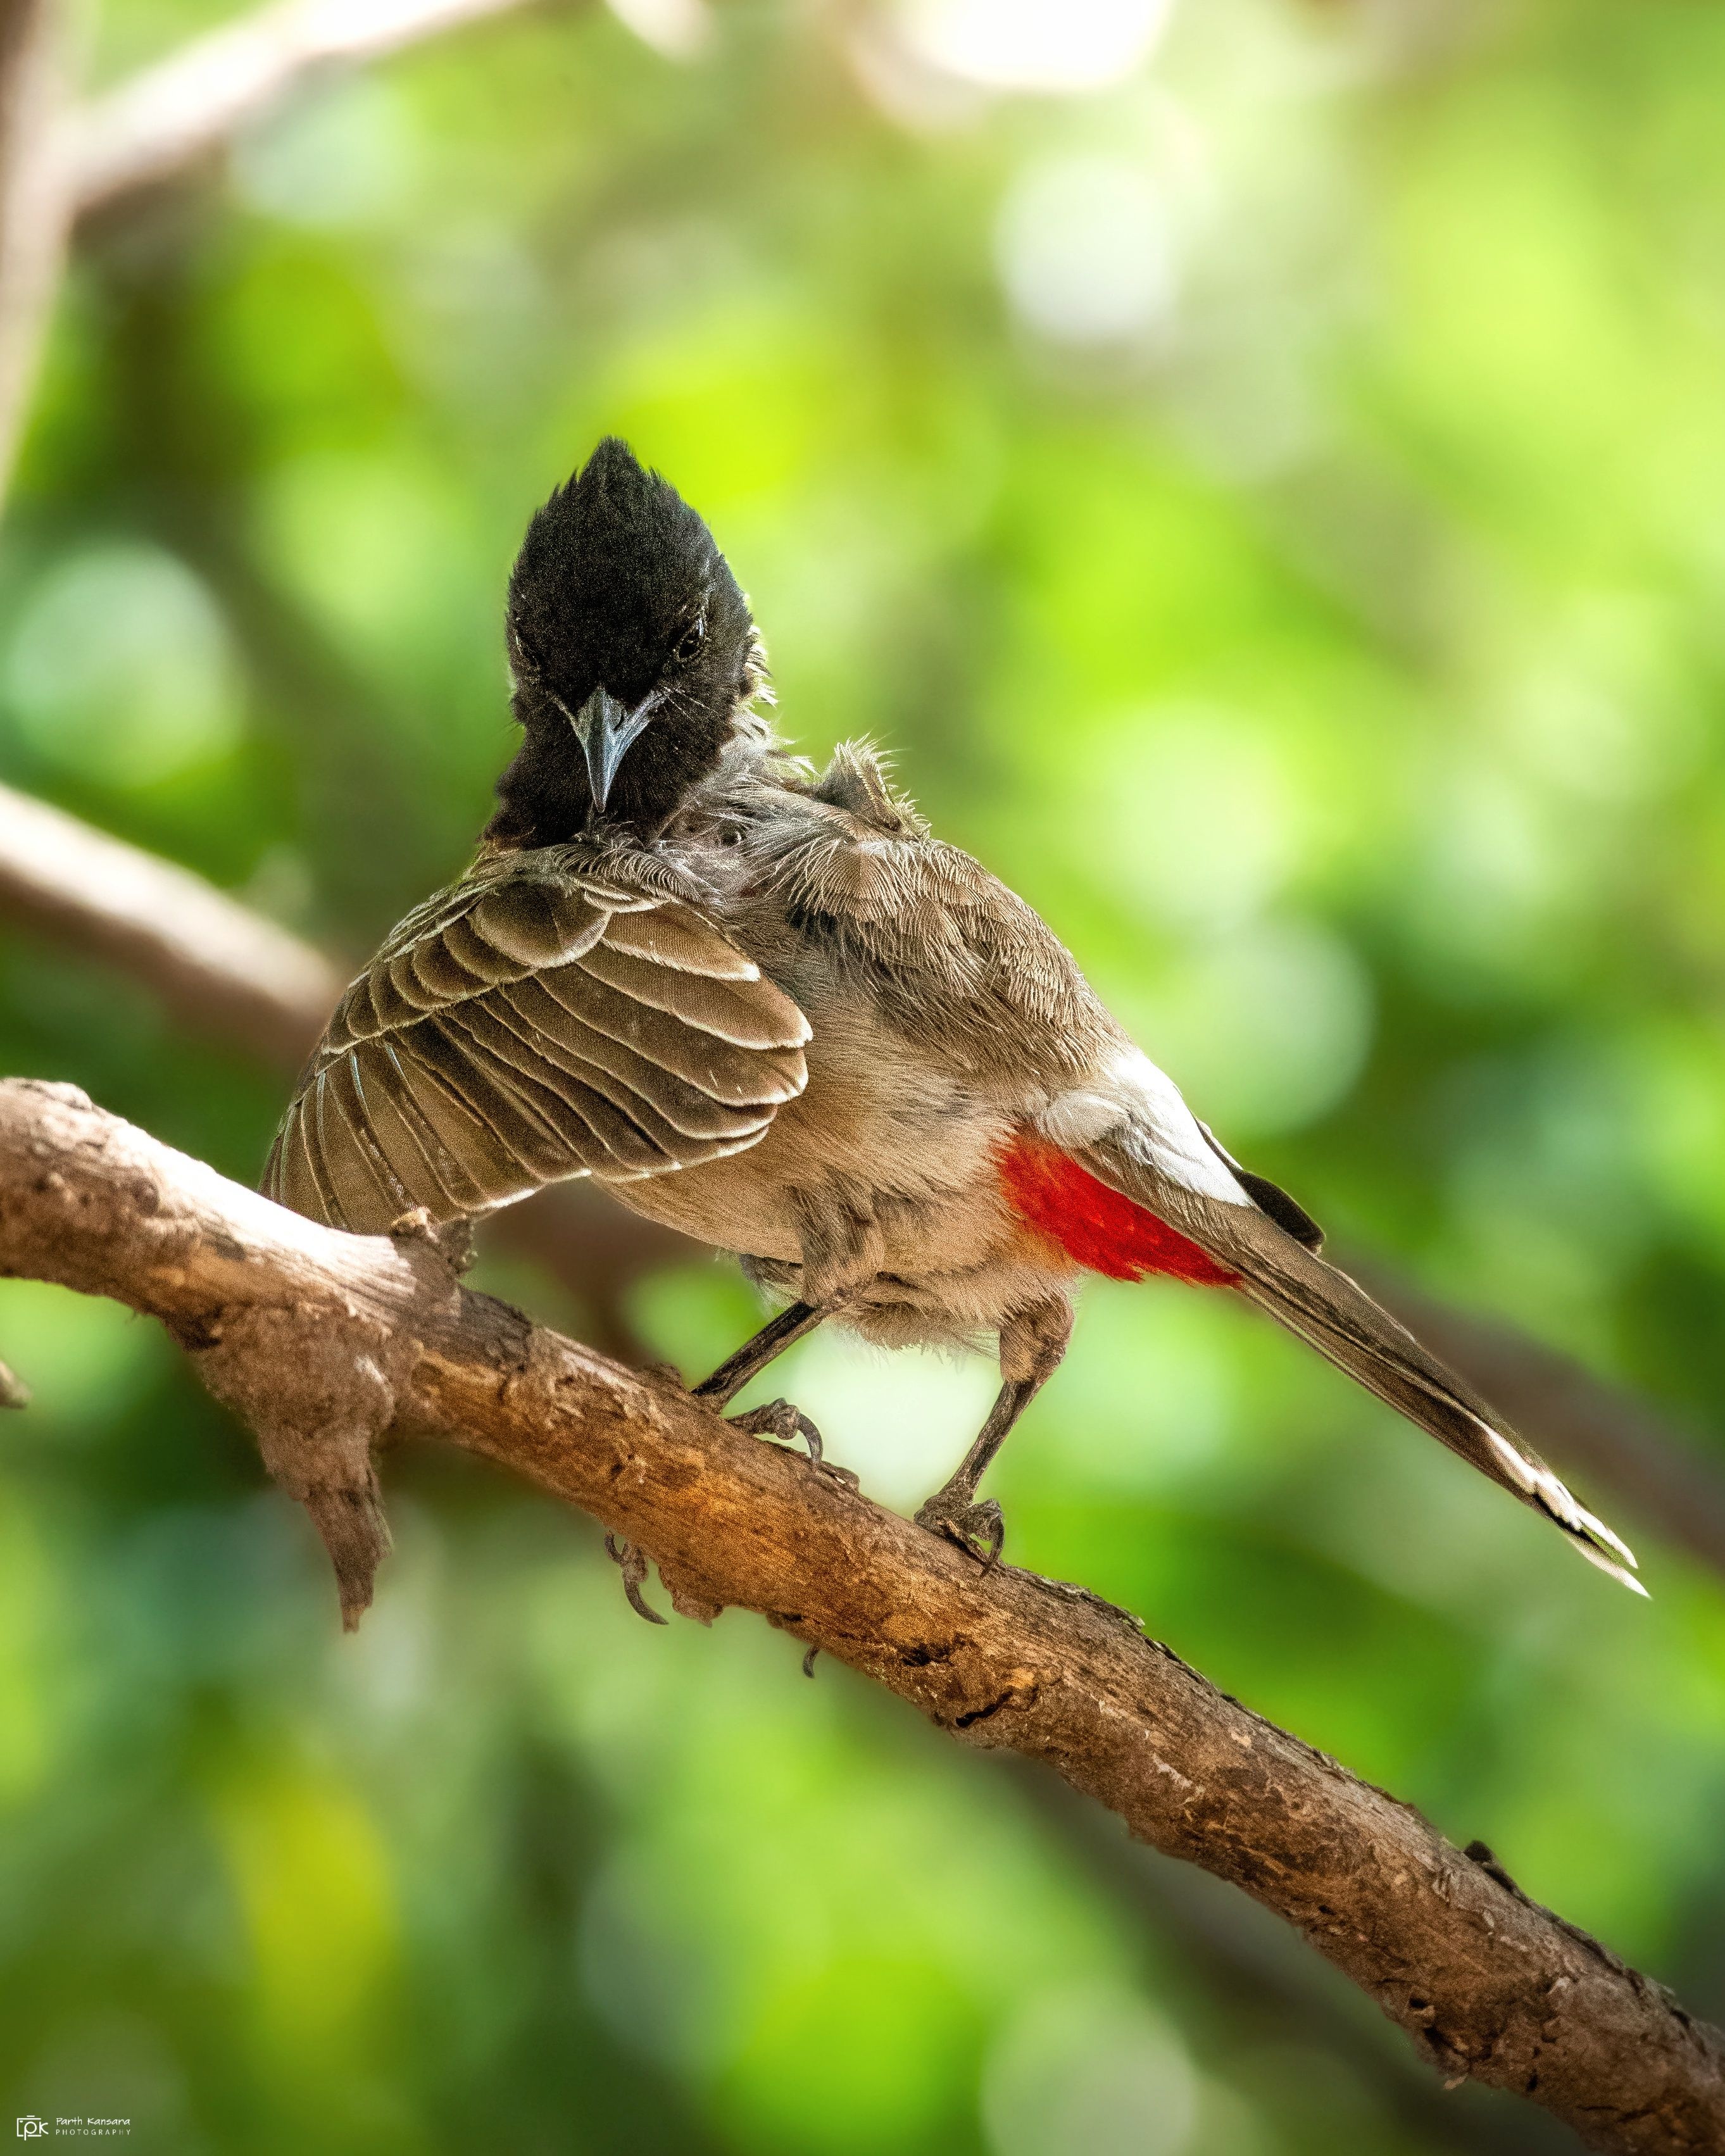 red-vented bulbul, pycnonotus cafer, grk, greater rann of kutch, nature, 35awards, 35photo, wildlife, birds, birds of india, parth kansara, parth kansara wildlife, indian wildlife, photo, photography, kutch, birds of kutch, nakhatrana, kutch wildlife,, kansara parth